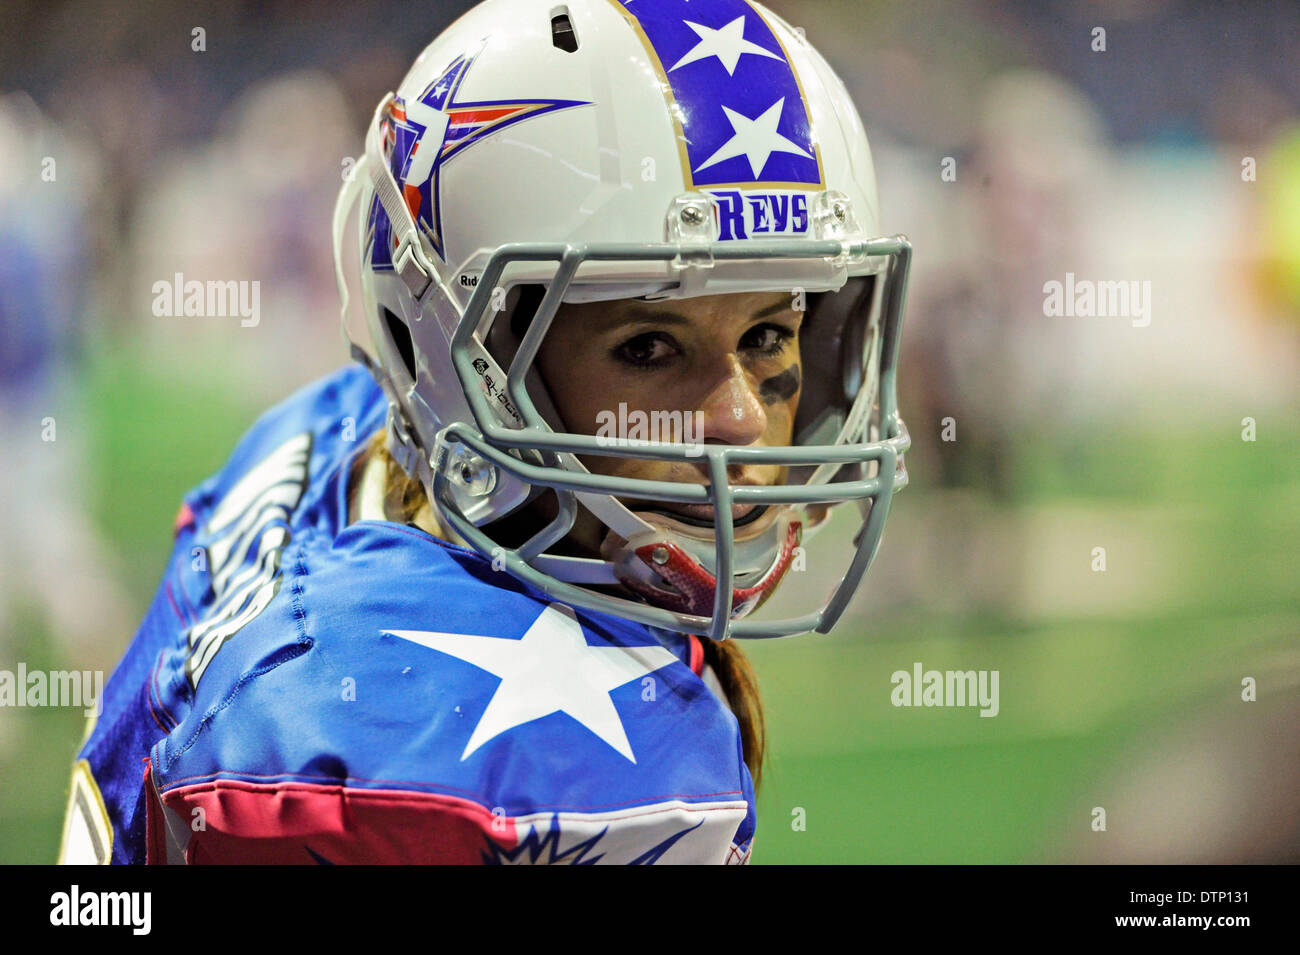 Allen, TX, USA. 21st Feb, 2014. Texas Revolution running back Jennifer Welter (47) in looks back from the bench area during an Indoor Football League game at the Allen Event Center Friday, February 21, 2014, in Allen, Texas. The 5-foot-2-inch, 130 pound Welter is the first woman to play professional football at a position other than kicker, she made the final roster of the Texas Revolution of the Indoor Football League, as a running back. © csm/Alamy Live News Stock Photo